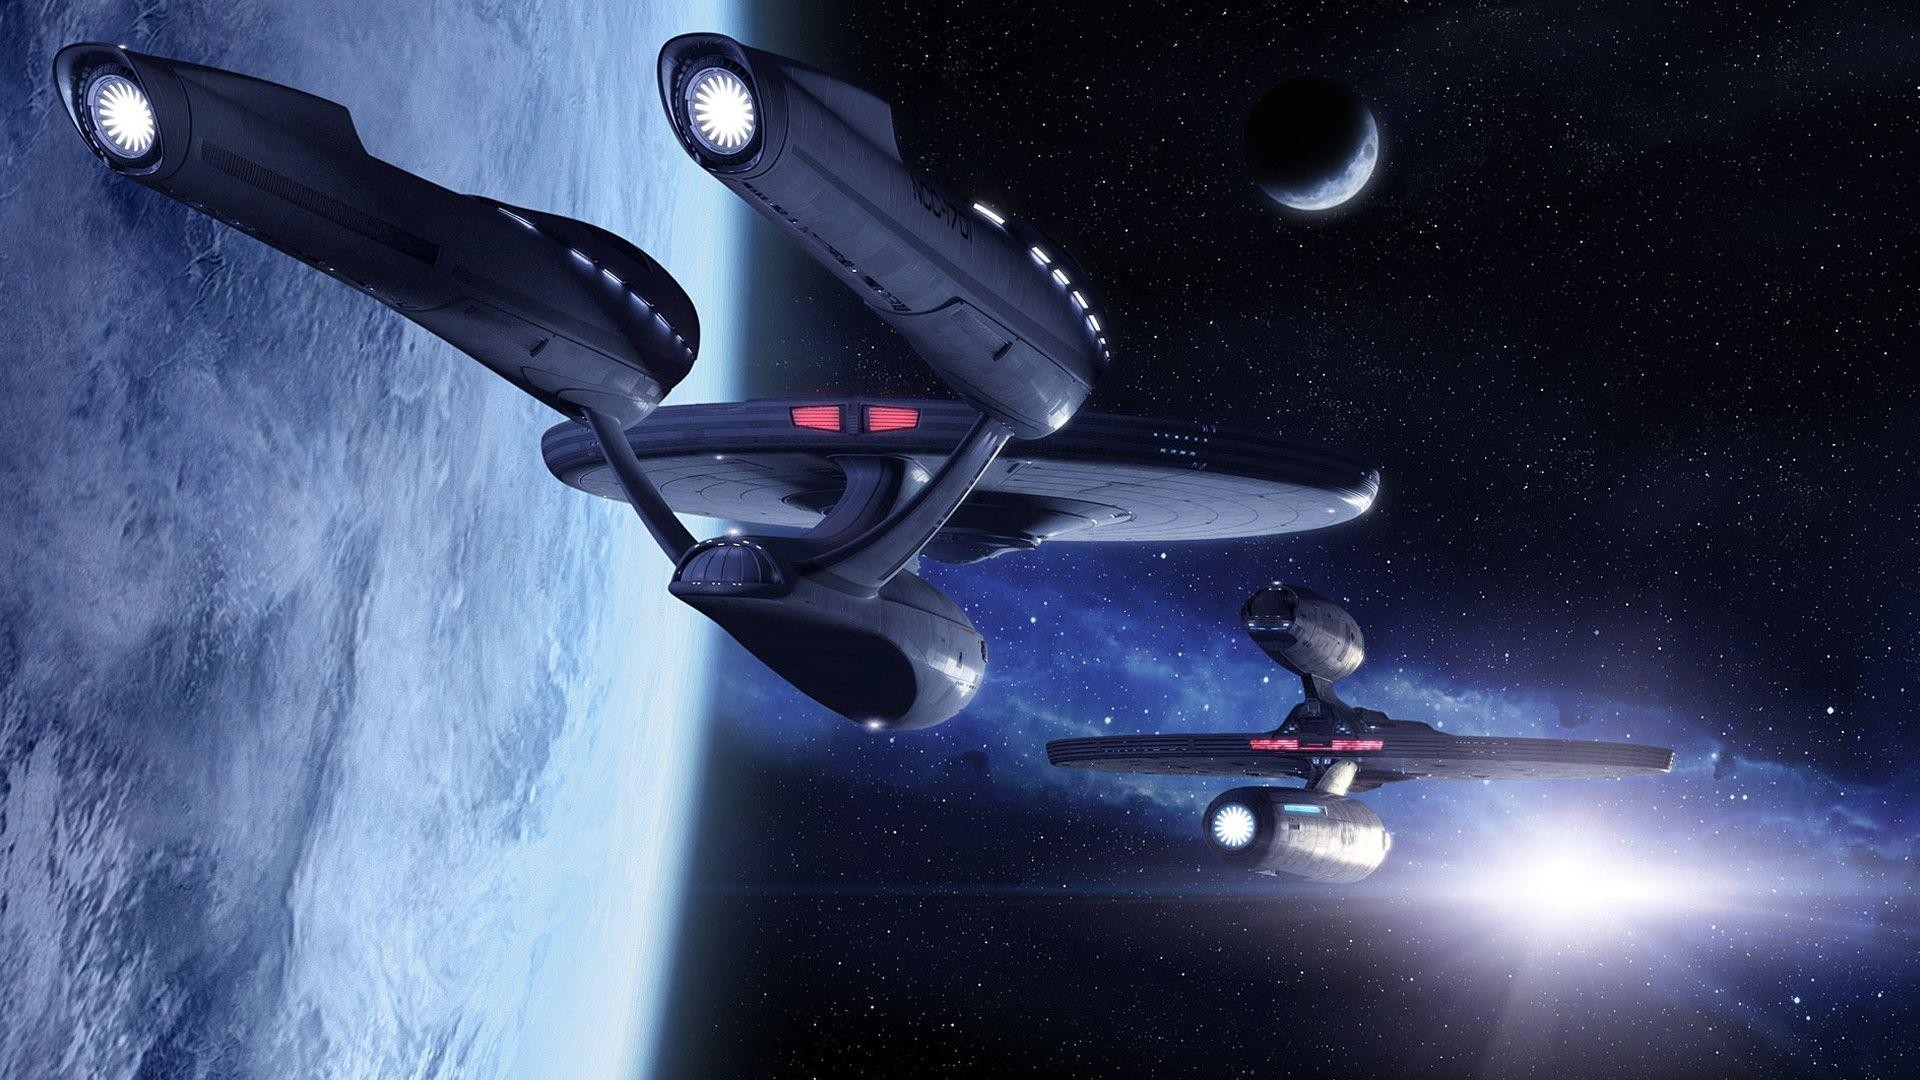 1920x1080 Blue Spaceship Wallpaper Wallpapers Spaceships Puter Images .